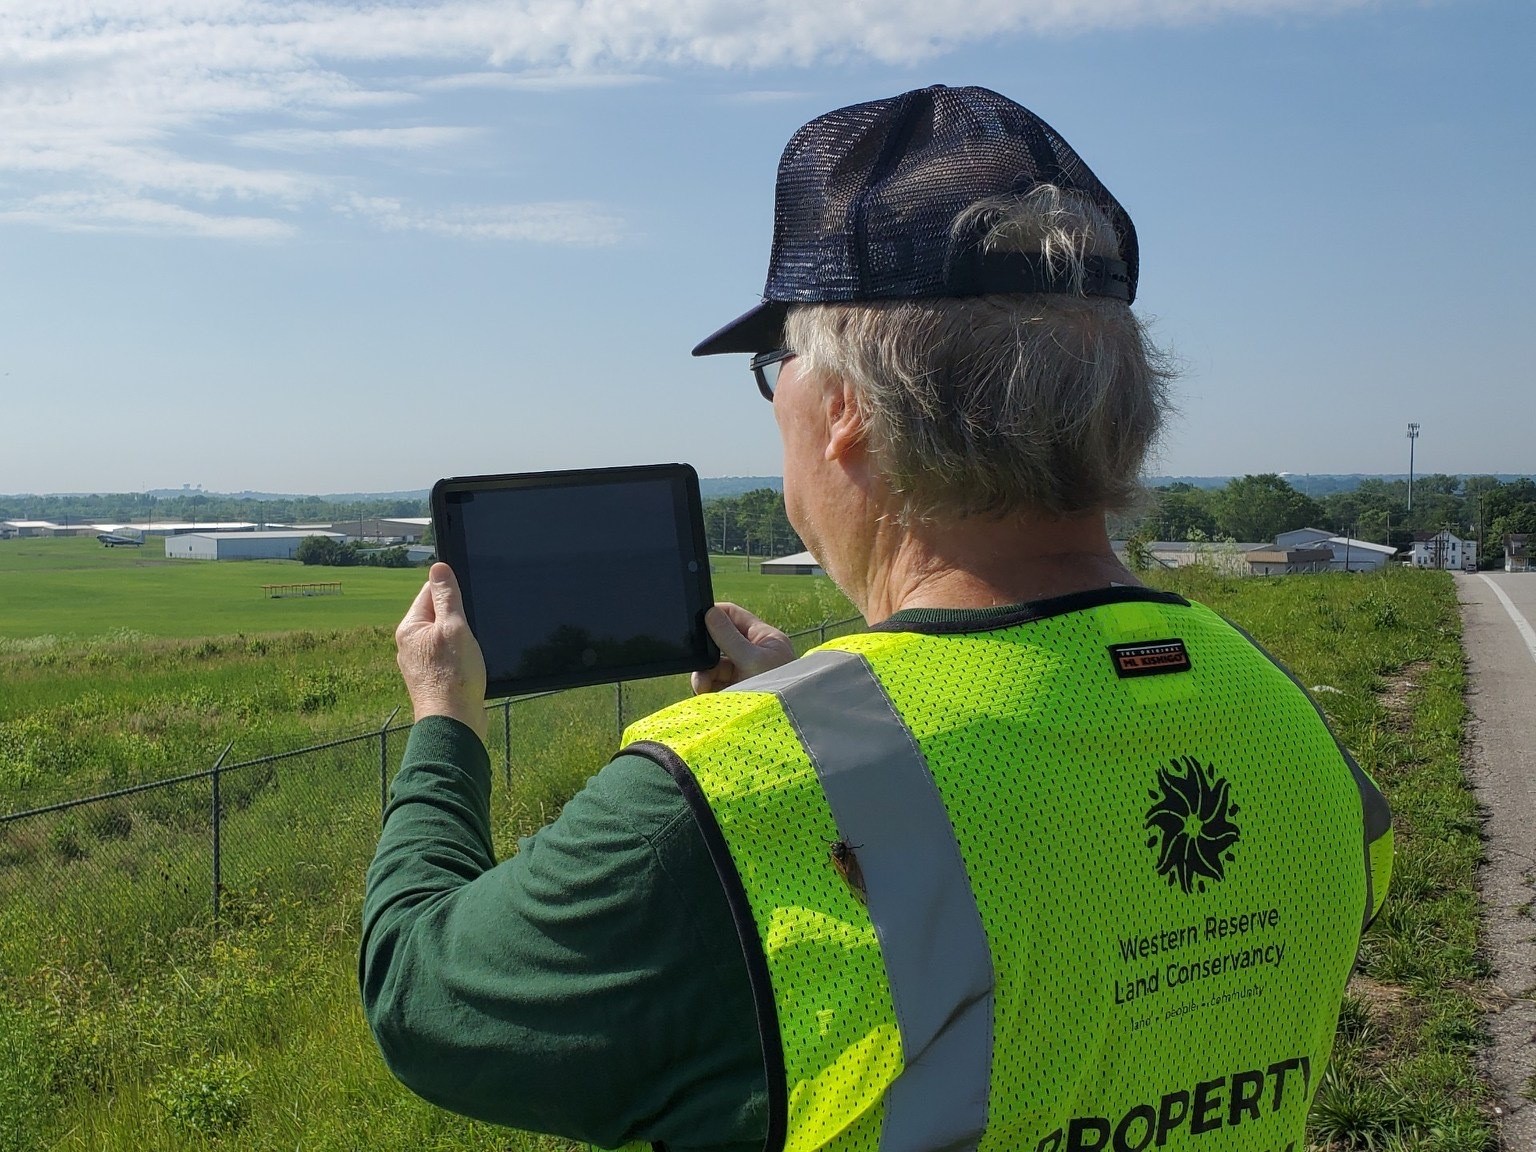 Western Reserve Land Conservancy using the Regrid Property App on an iPad